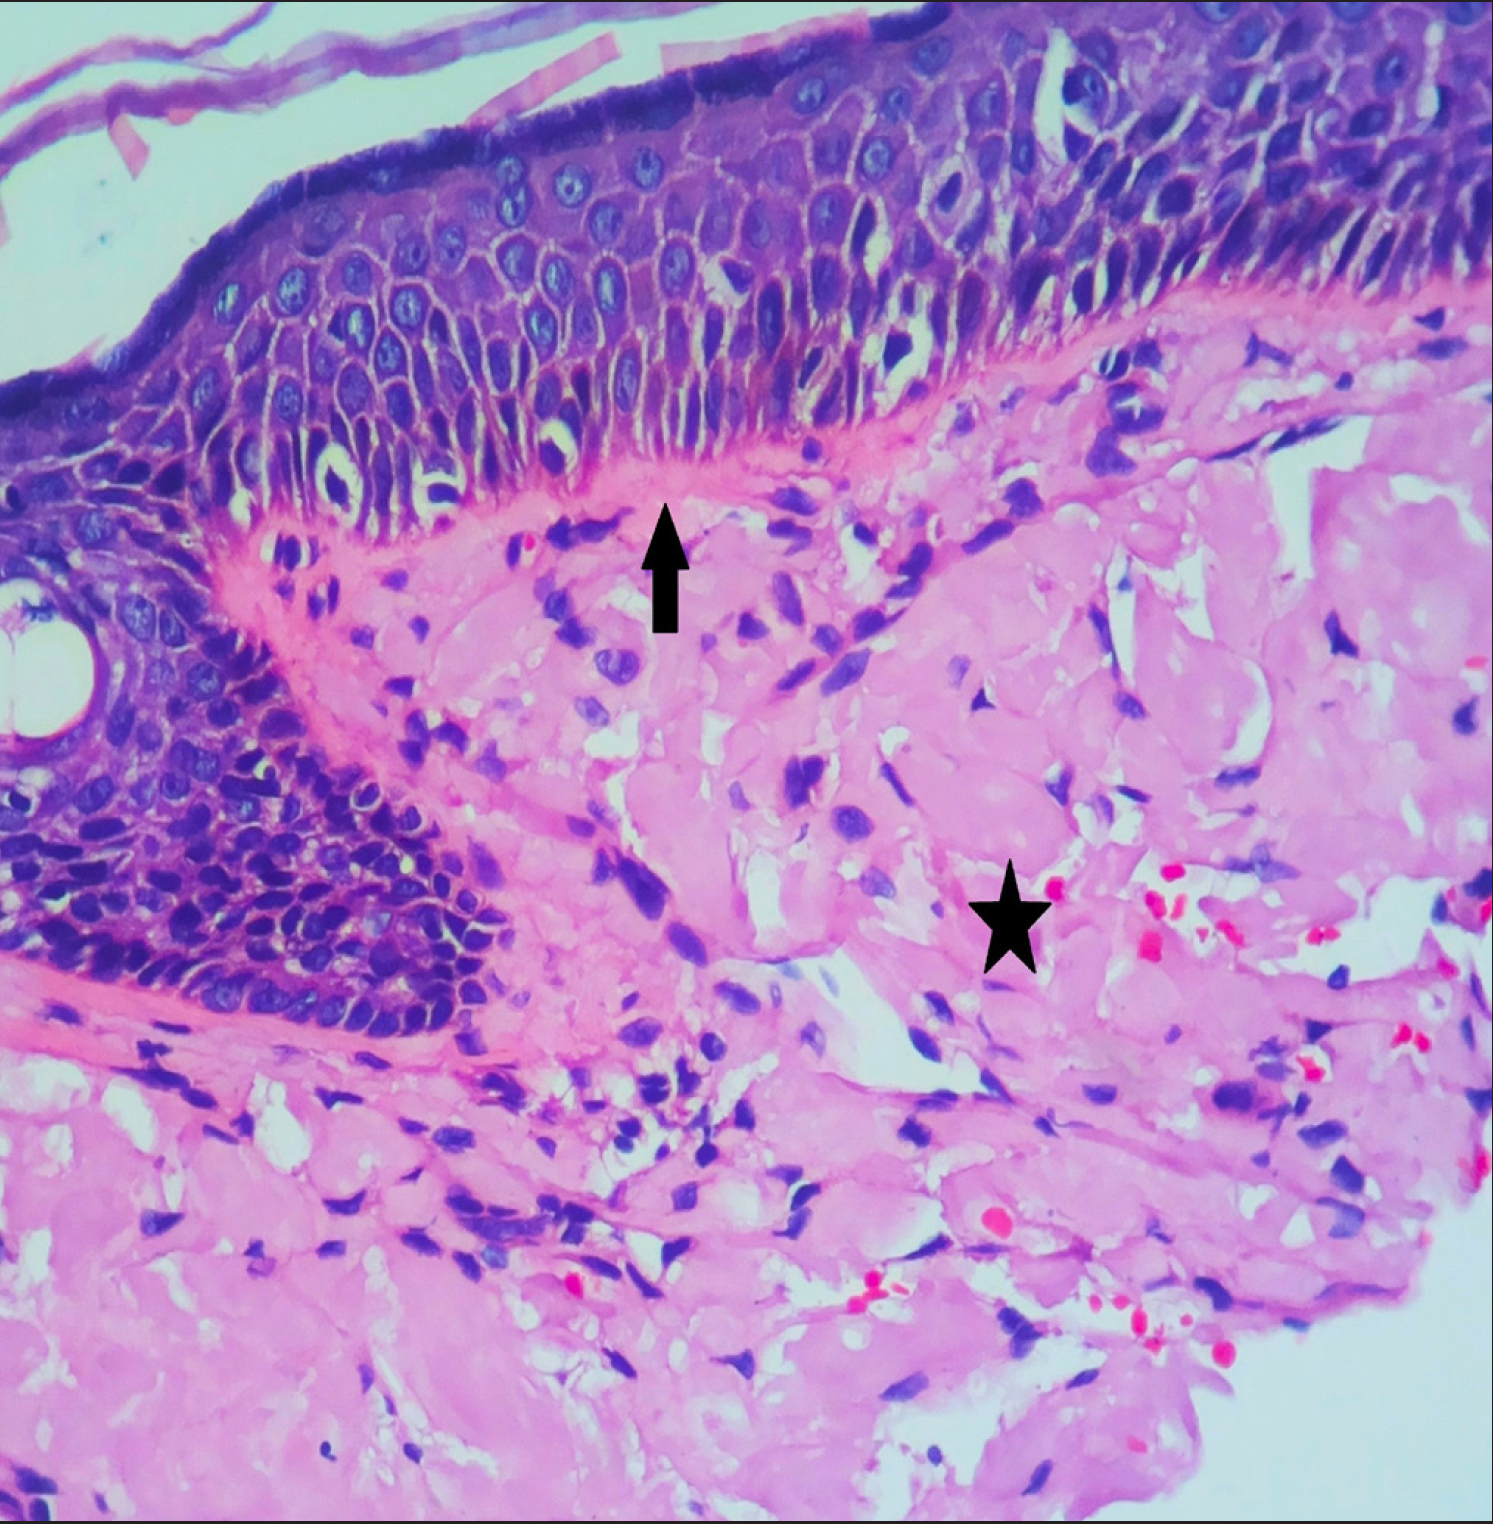 Colloid degeneration in colloid milium showing deposition of amorphous eosinophilic material in upper dermis (asterisk) separated from epidermis by normal connective tissue (arrow) (H and E, 400x)